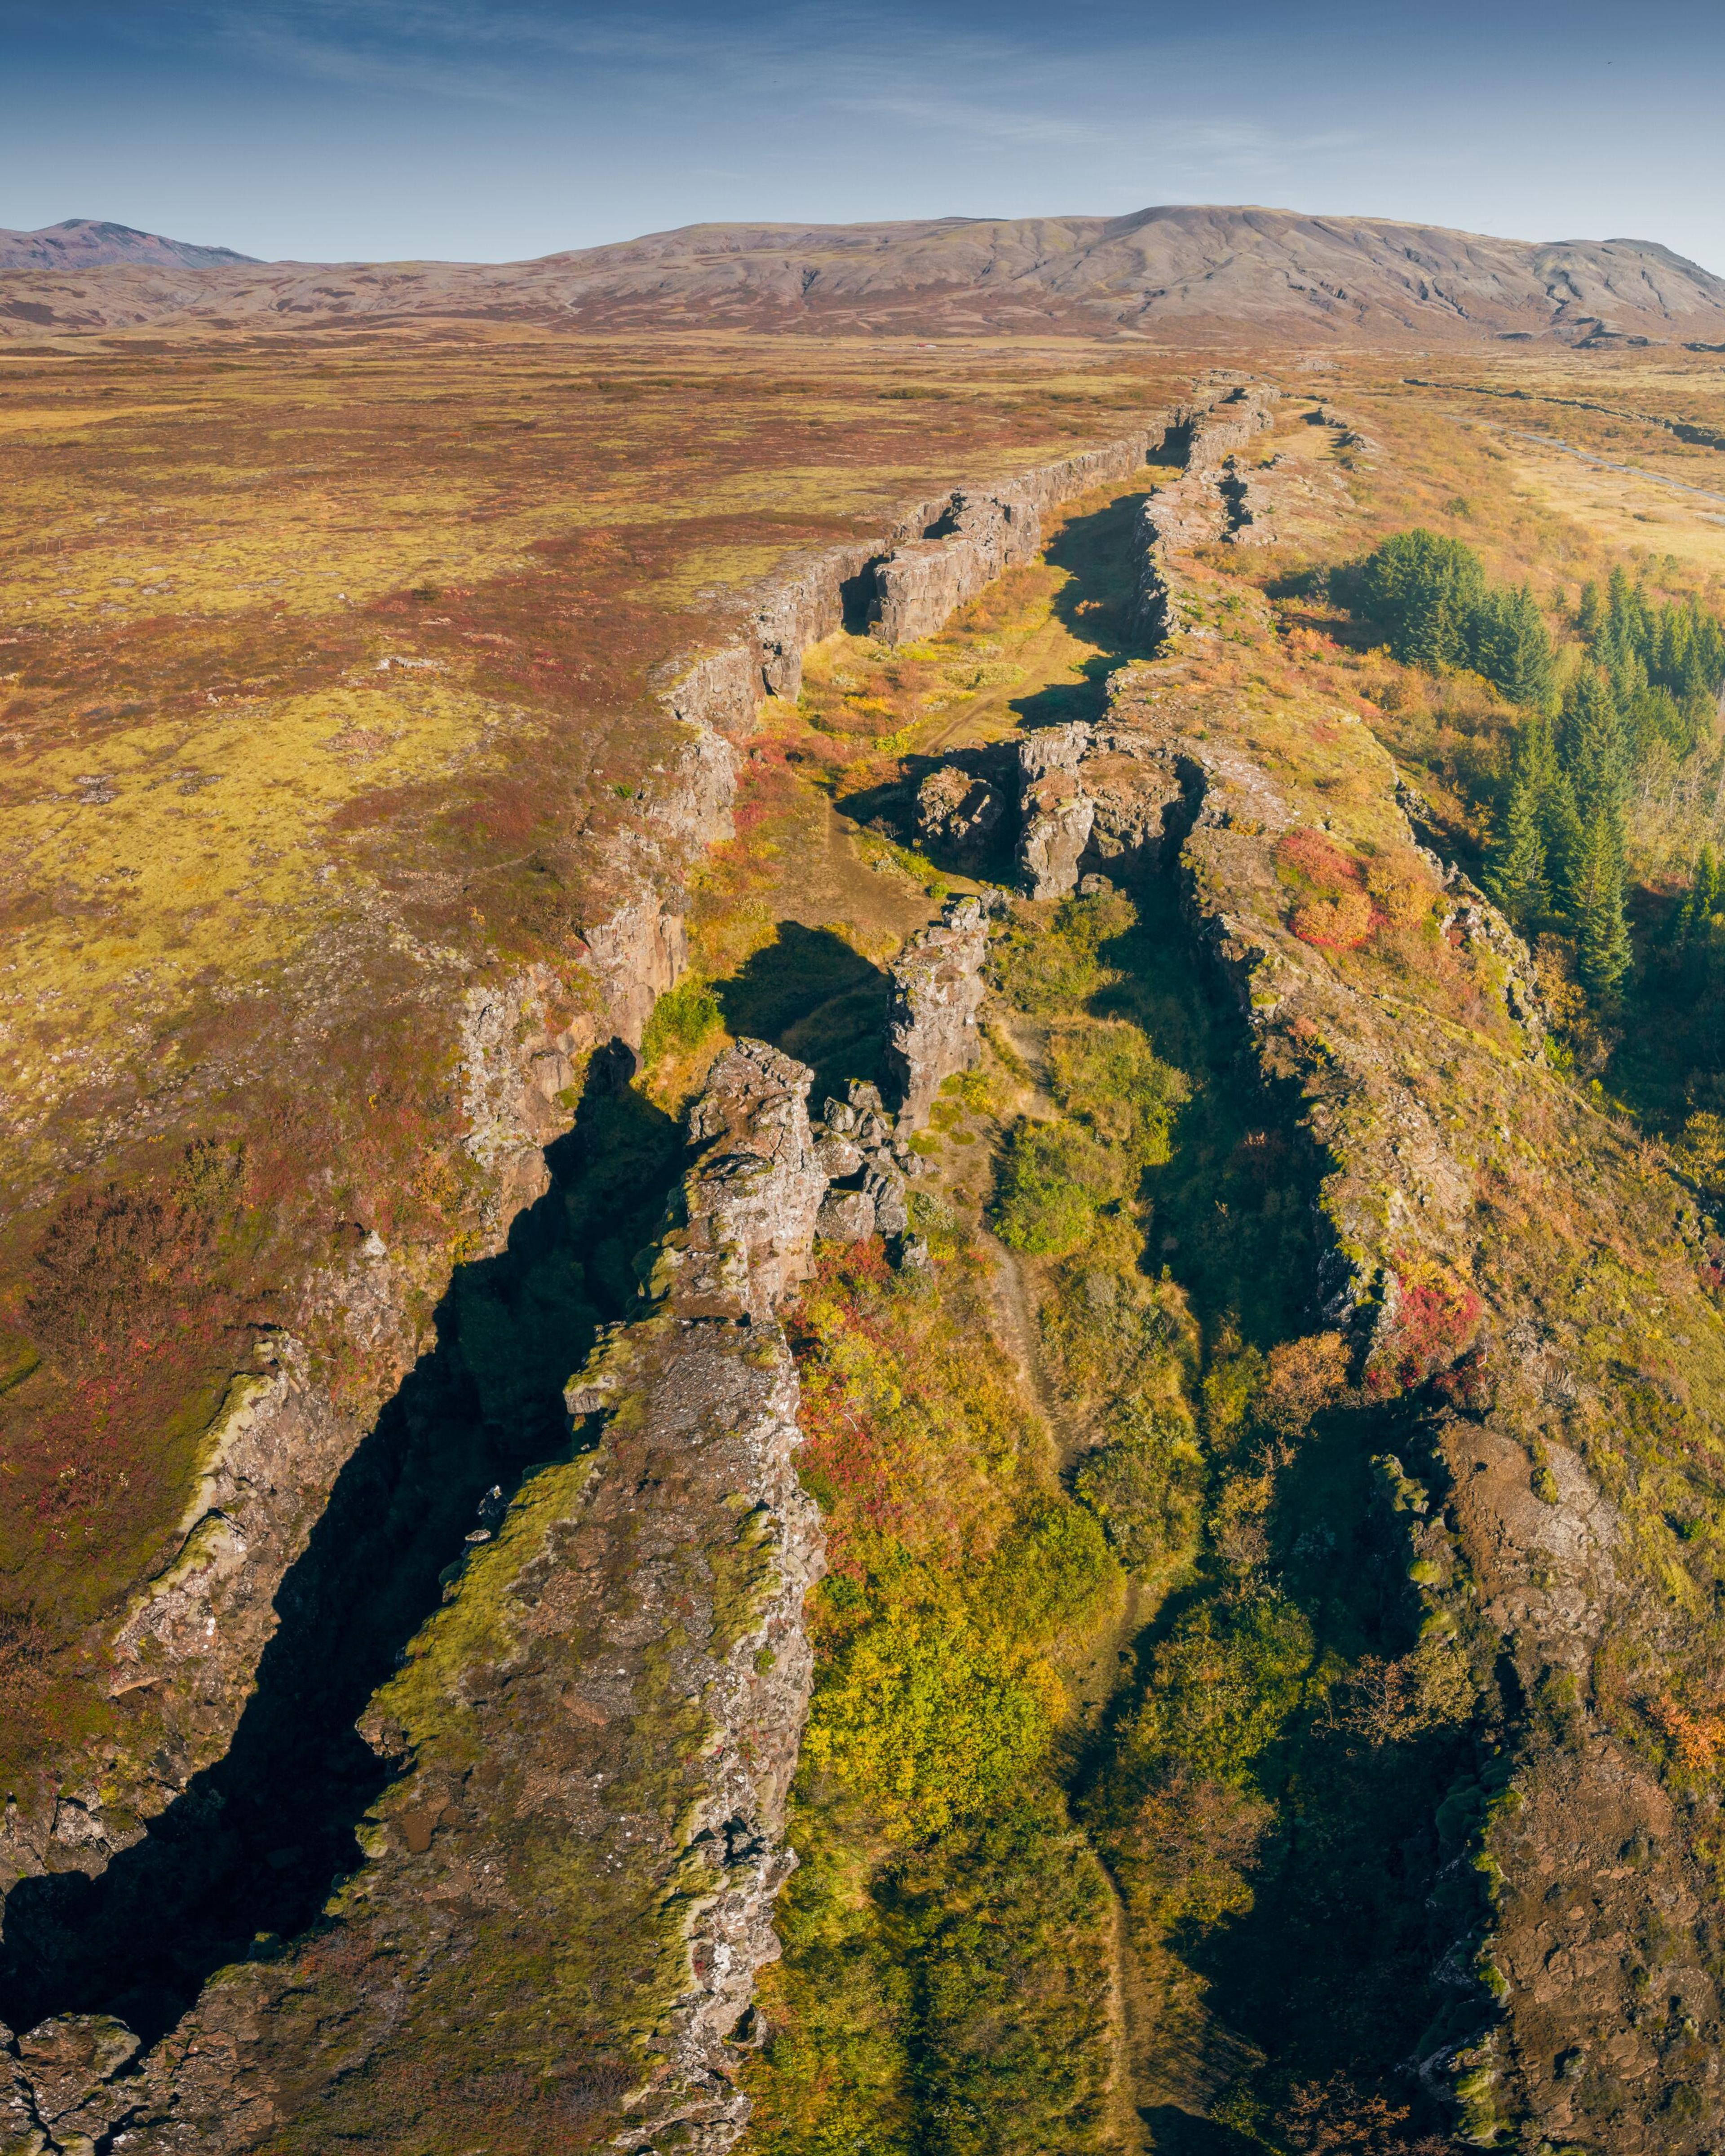 An aerial view of a dramatic ridge with lush, autumnal foliage on its slopes, surrounded by open fields, capturing the rugged terrain that is characteristic of the Icelandic landscape.